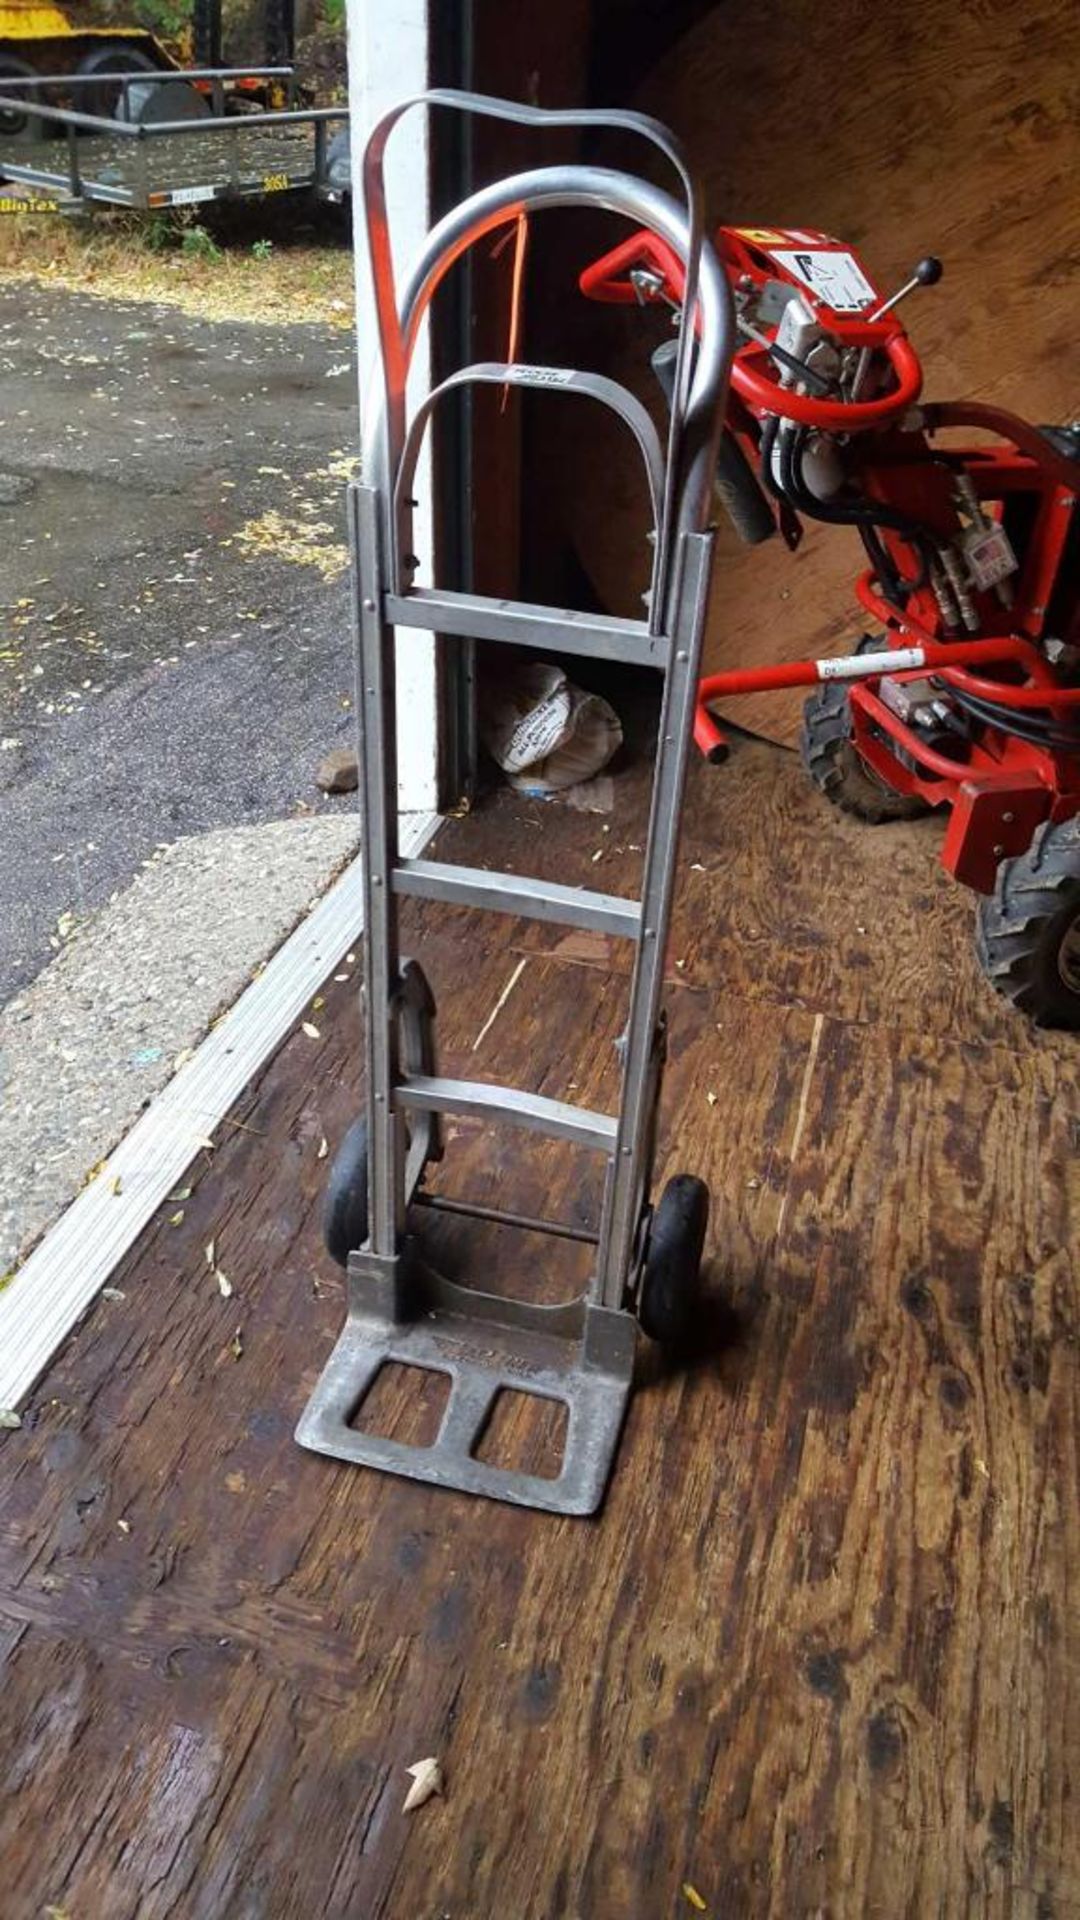 Malinger two wheel hand truck - Image 2 of 2